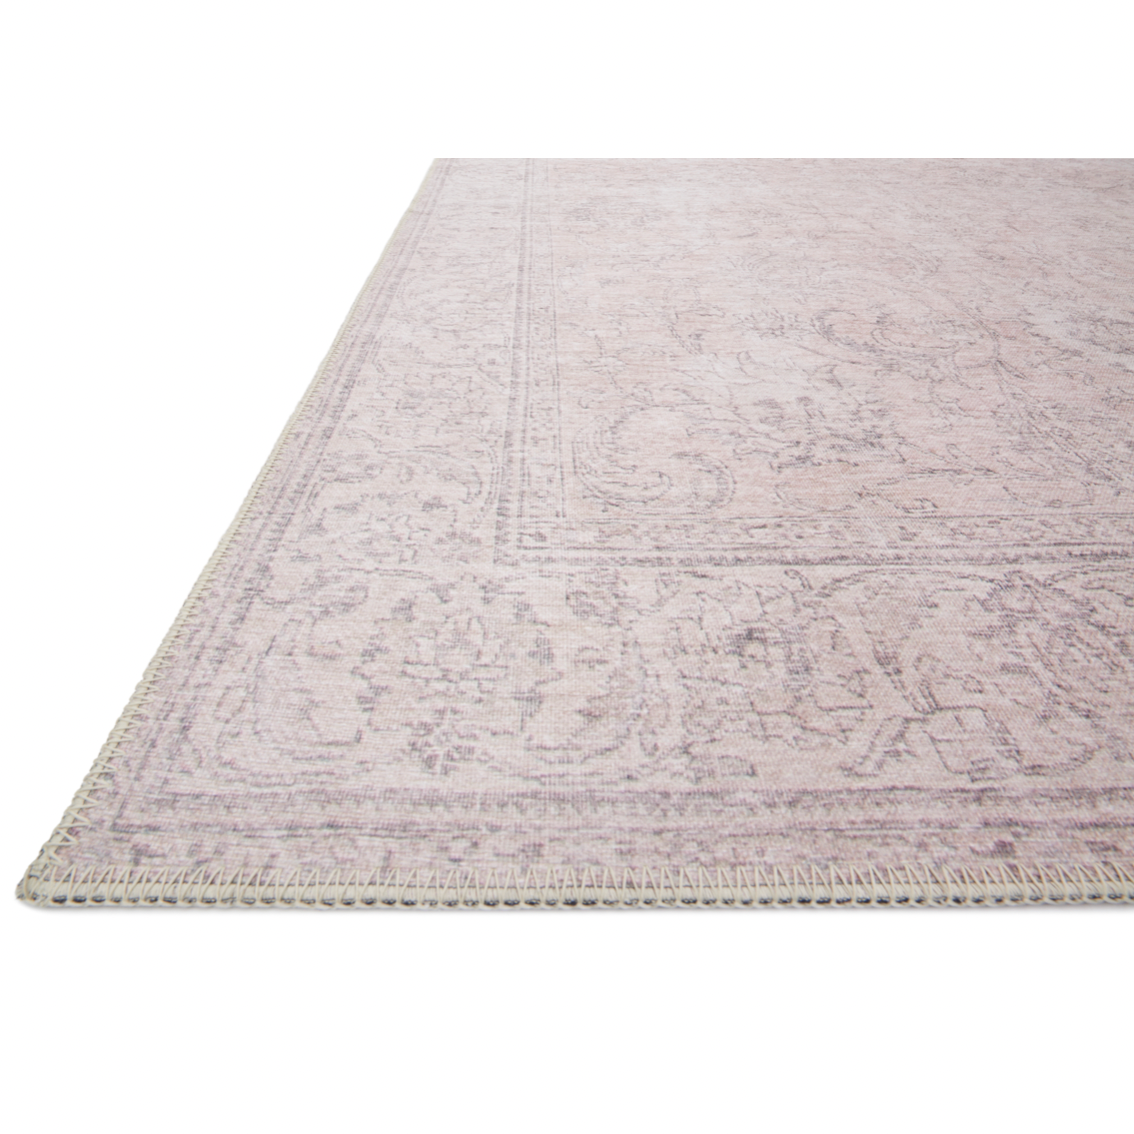 Timeless and classic, the Loloi Loren Sand Area Rug, or LQ-12, offers vintage hand-knotted looks at an affordable price. Created in Turkey using the most advanced rug-making technology, these printed designs provide a textured effect by portraying every single individual knot on a soft polyester base. 